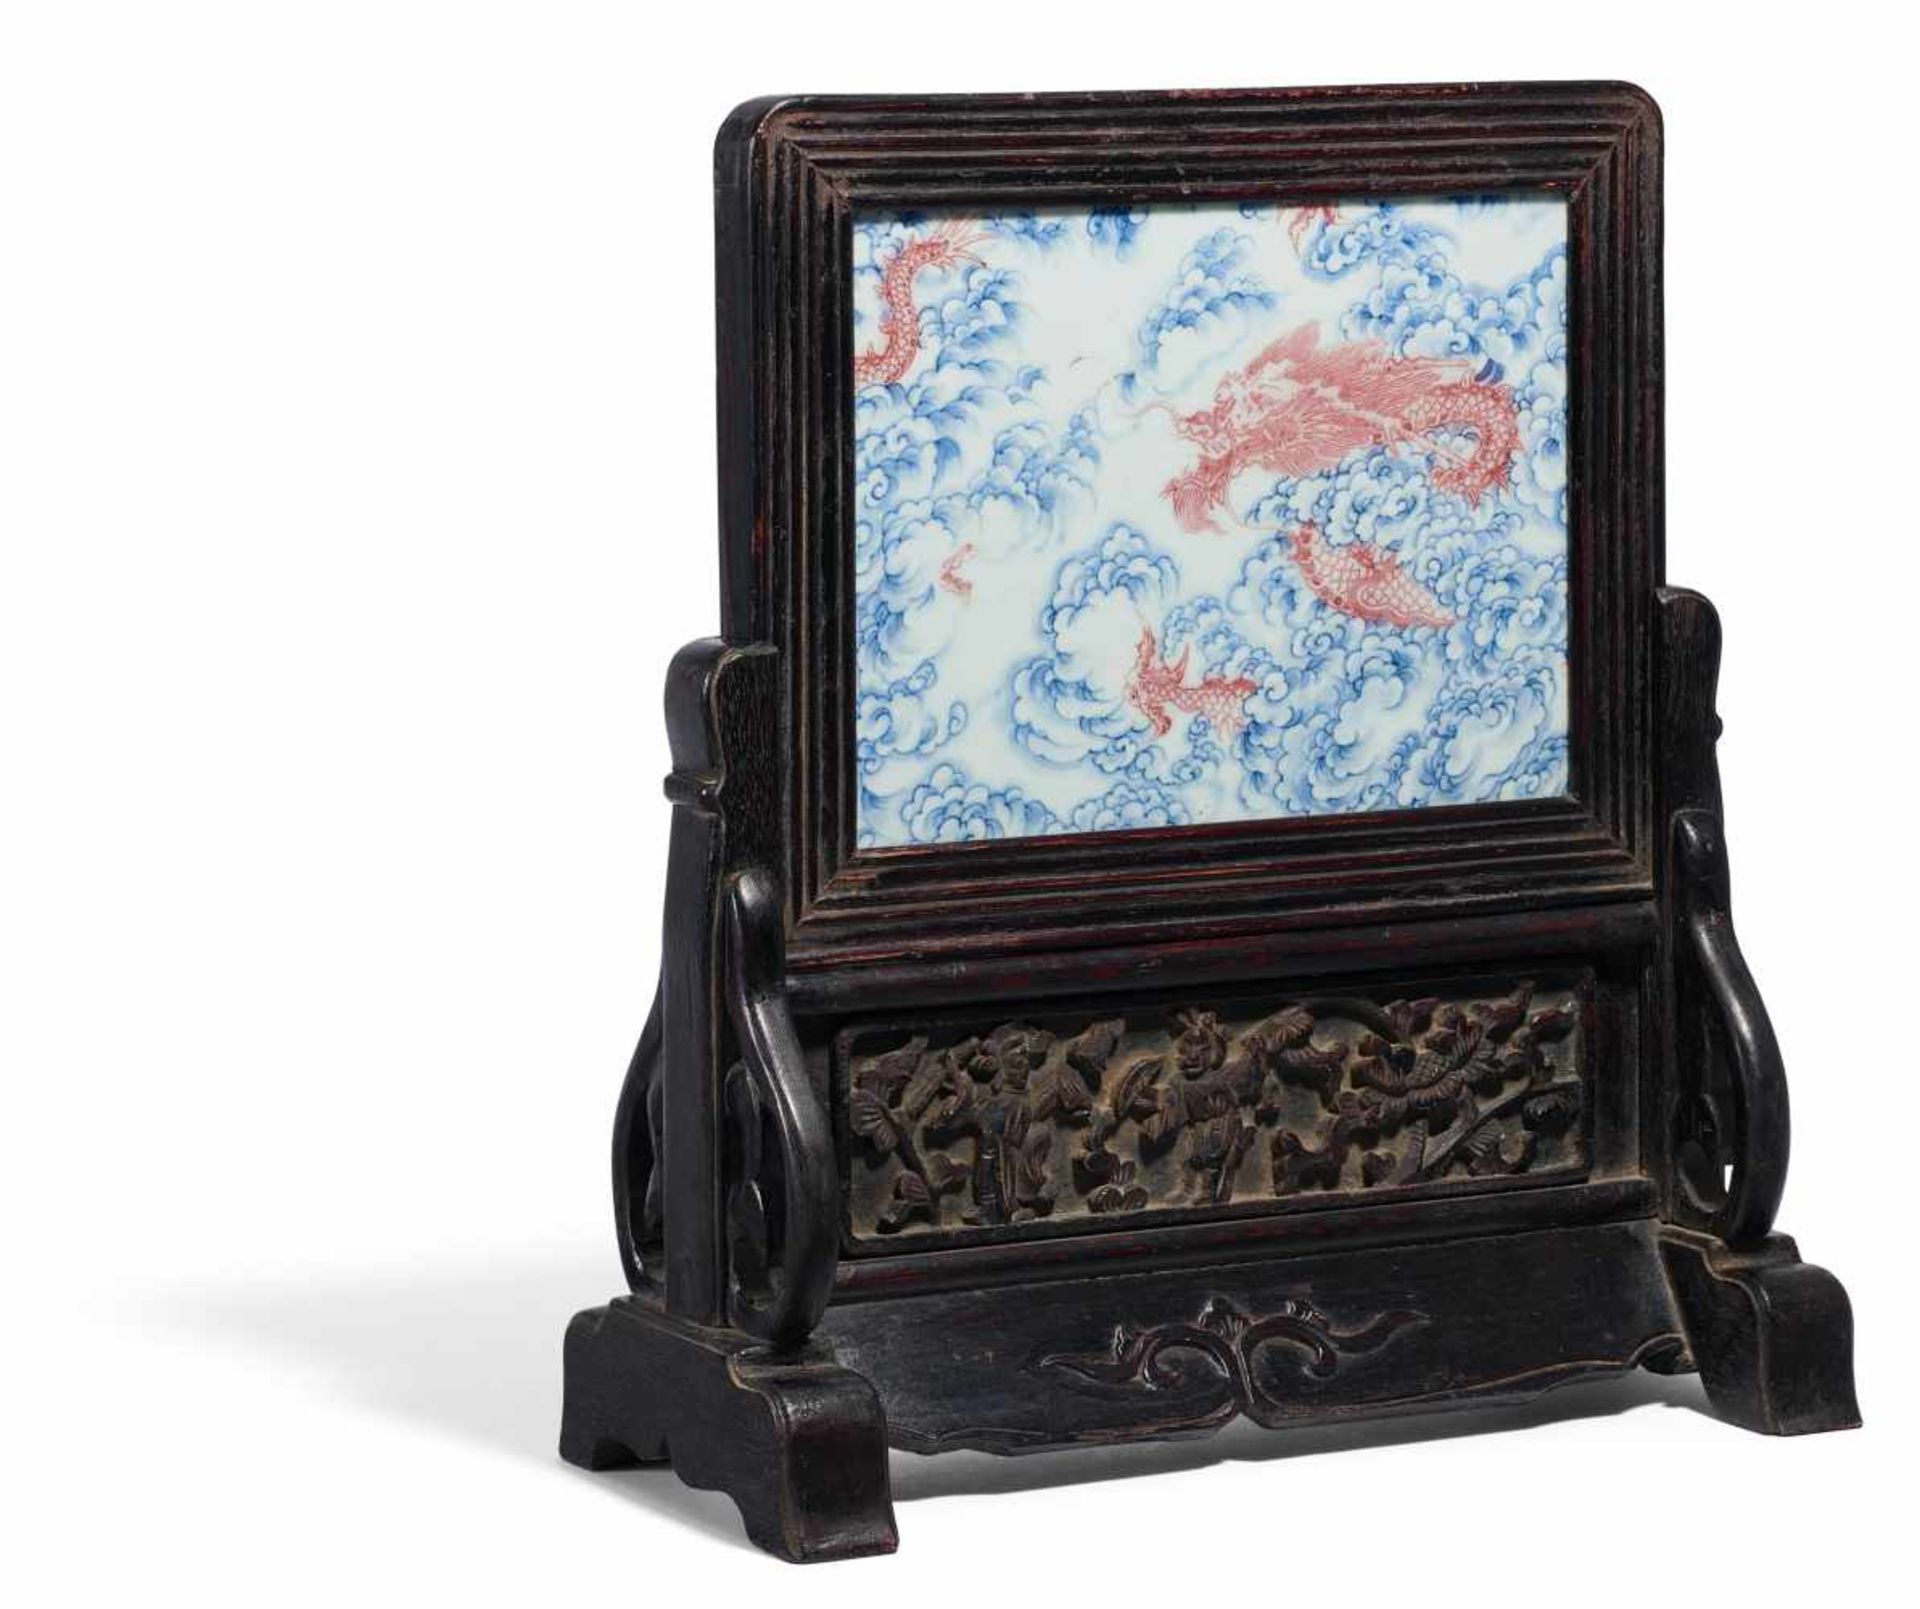 TABLE SCREEN WITH DRAGON AND CLOUDS. China. Qing dynasty. Guangxu period (1875-1908). Porcelain